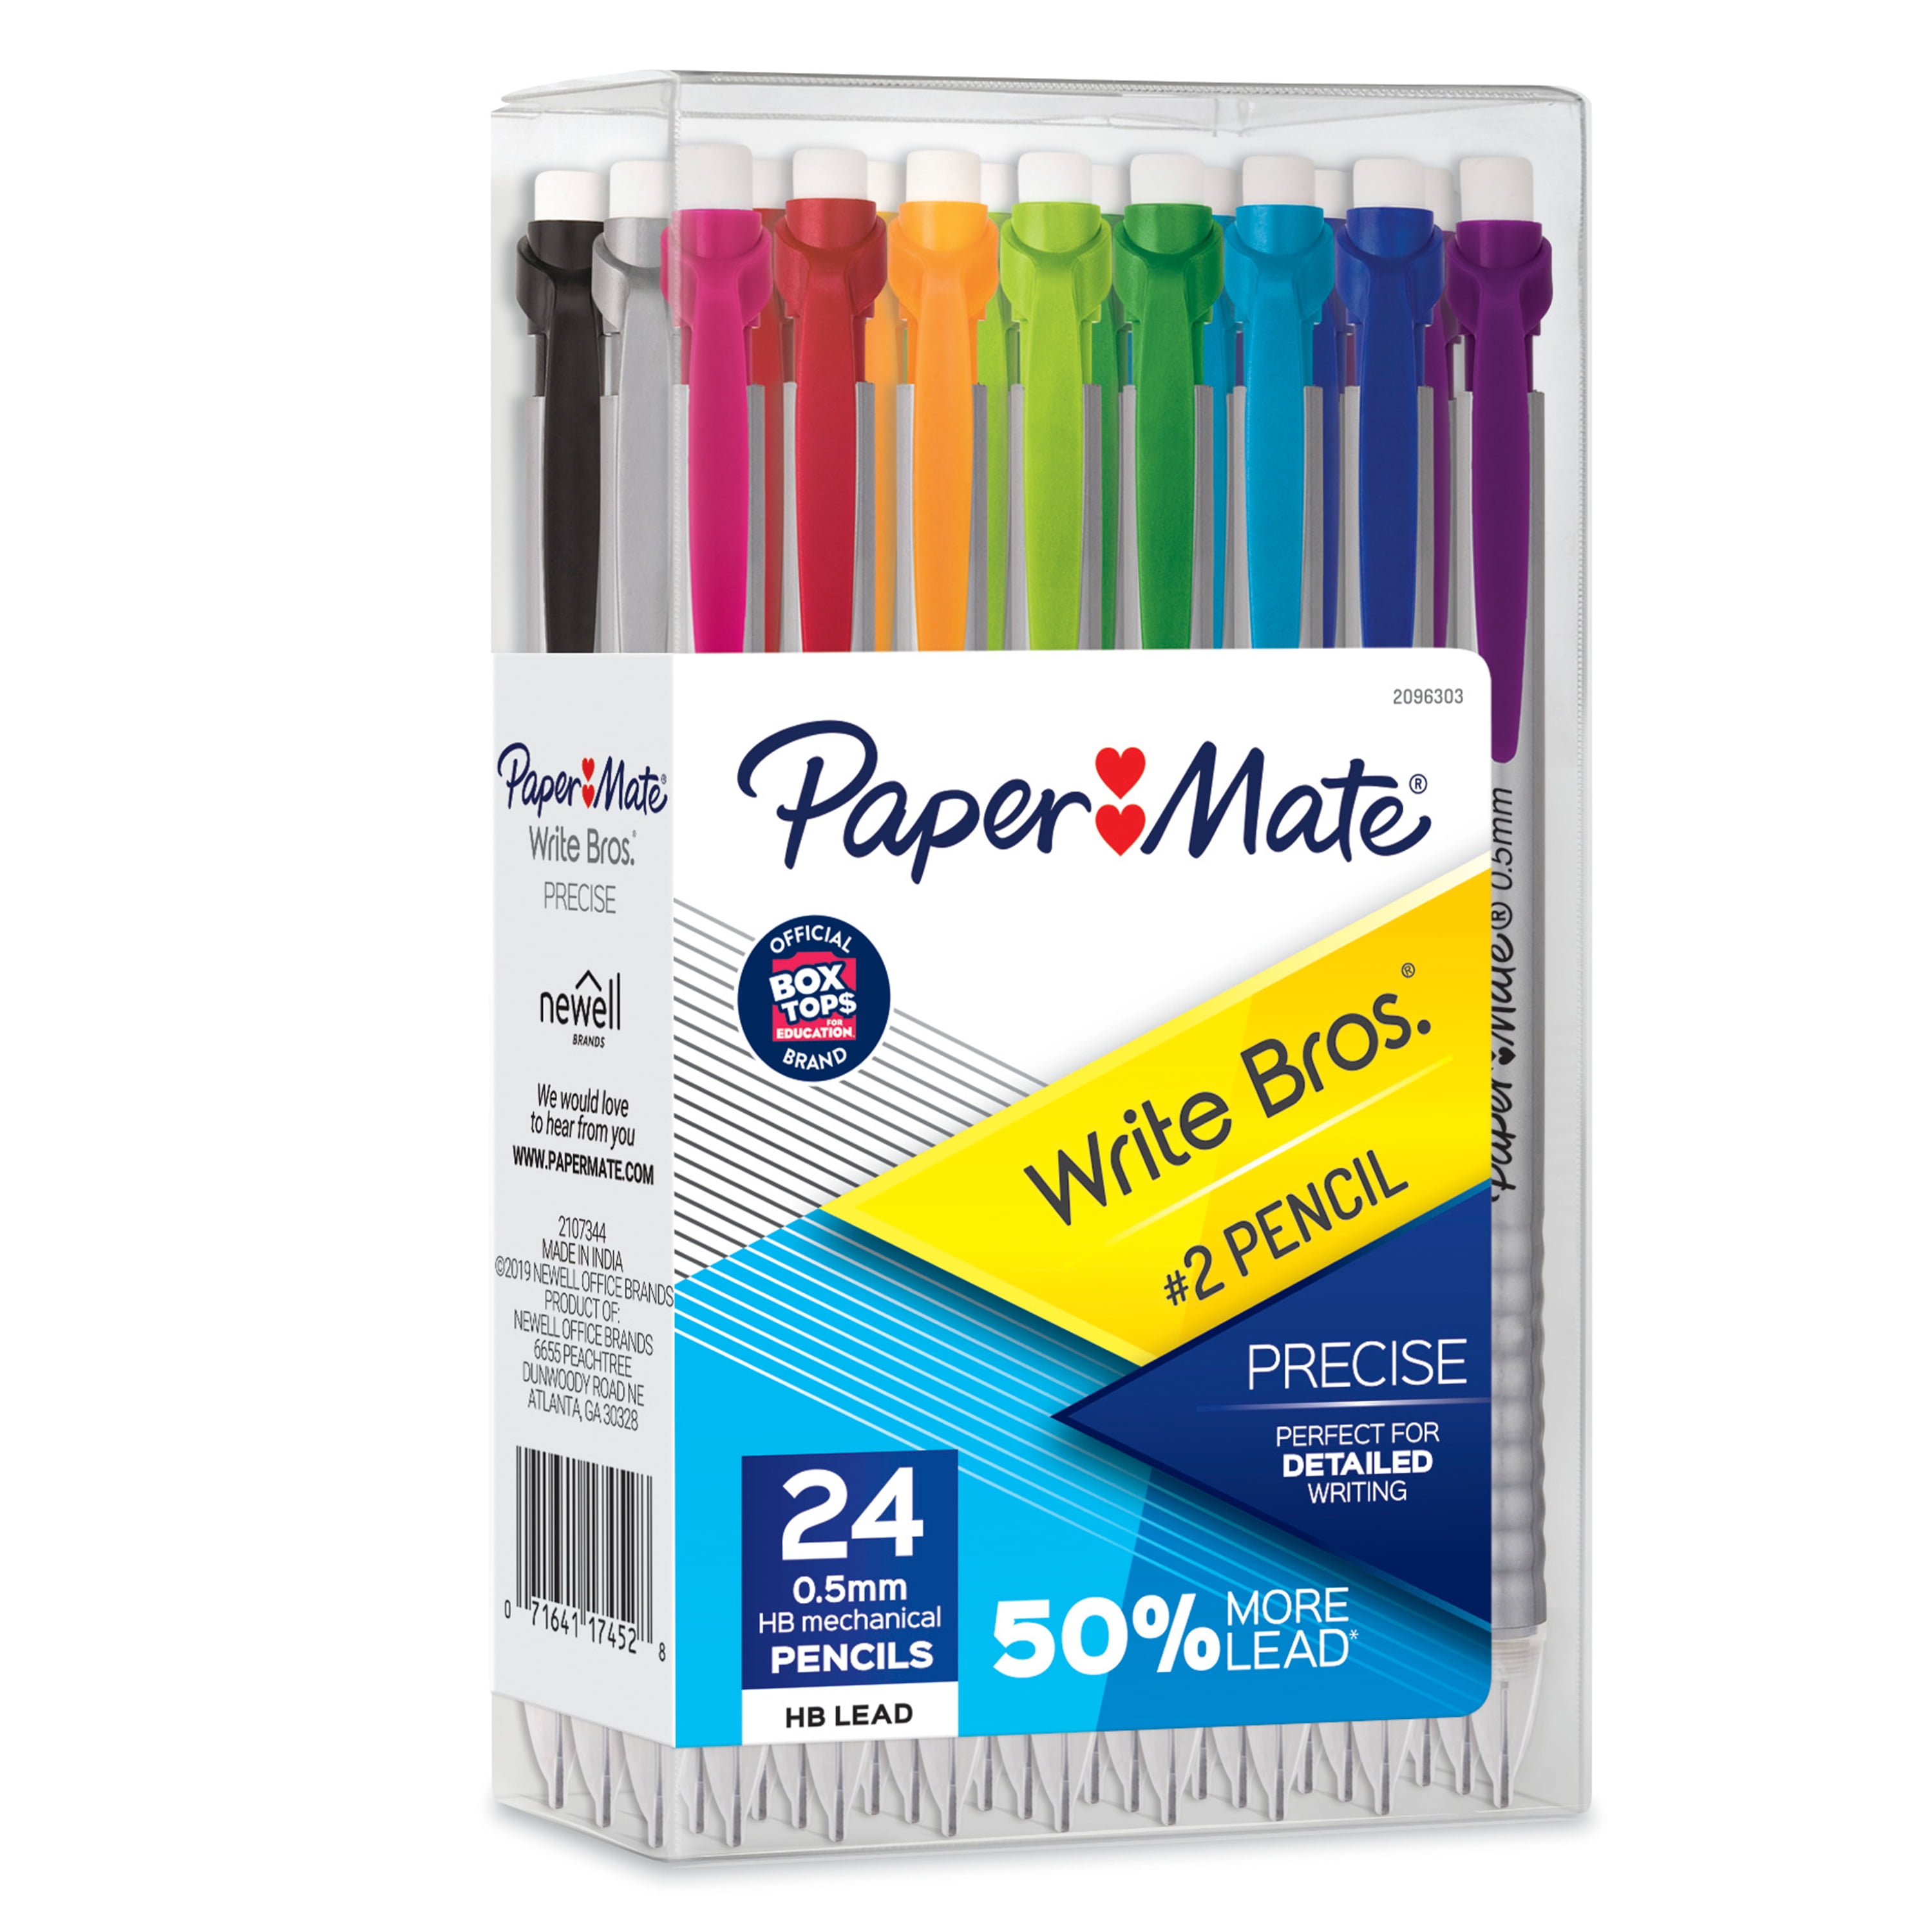 Paper Mate 24 Pack Mechanical Pencils Write Bros Classic #2 .7mm